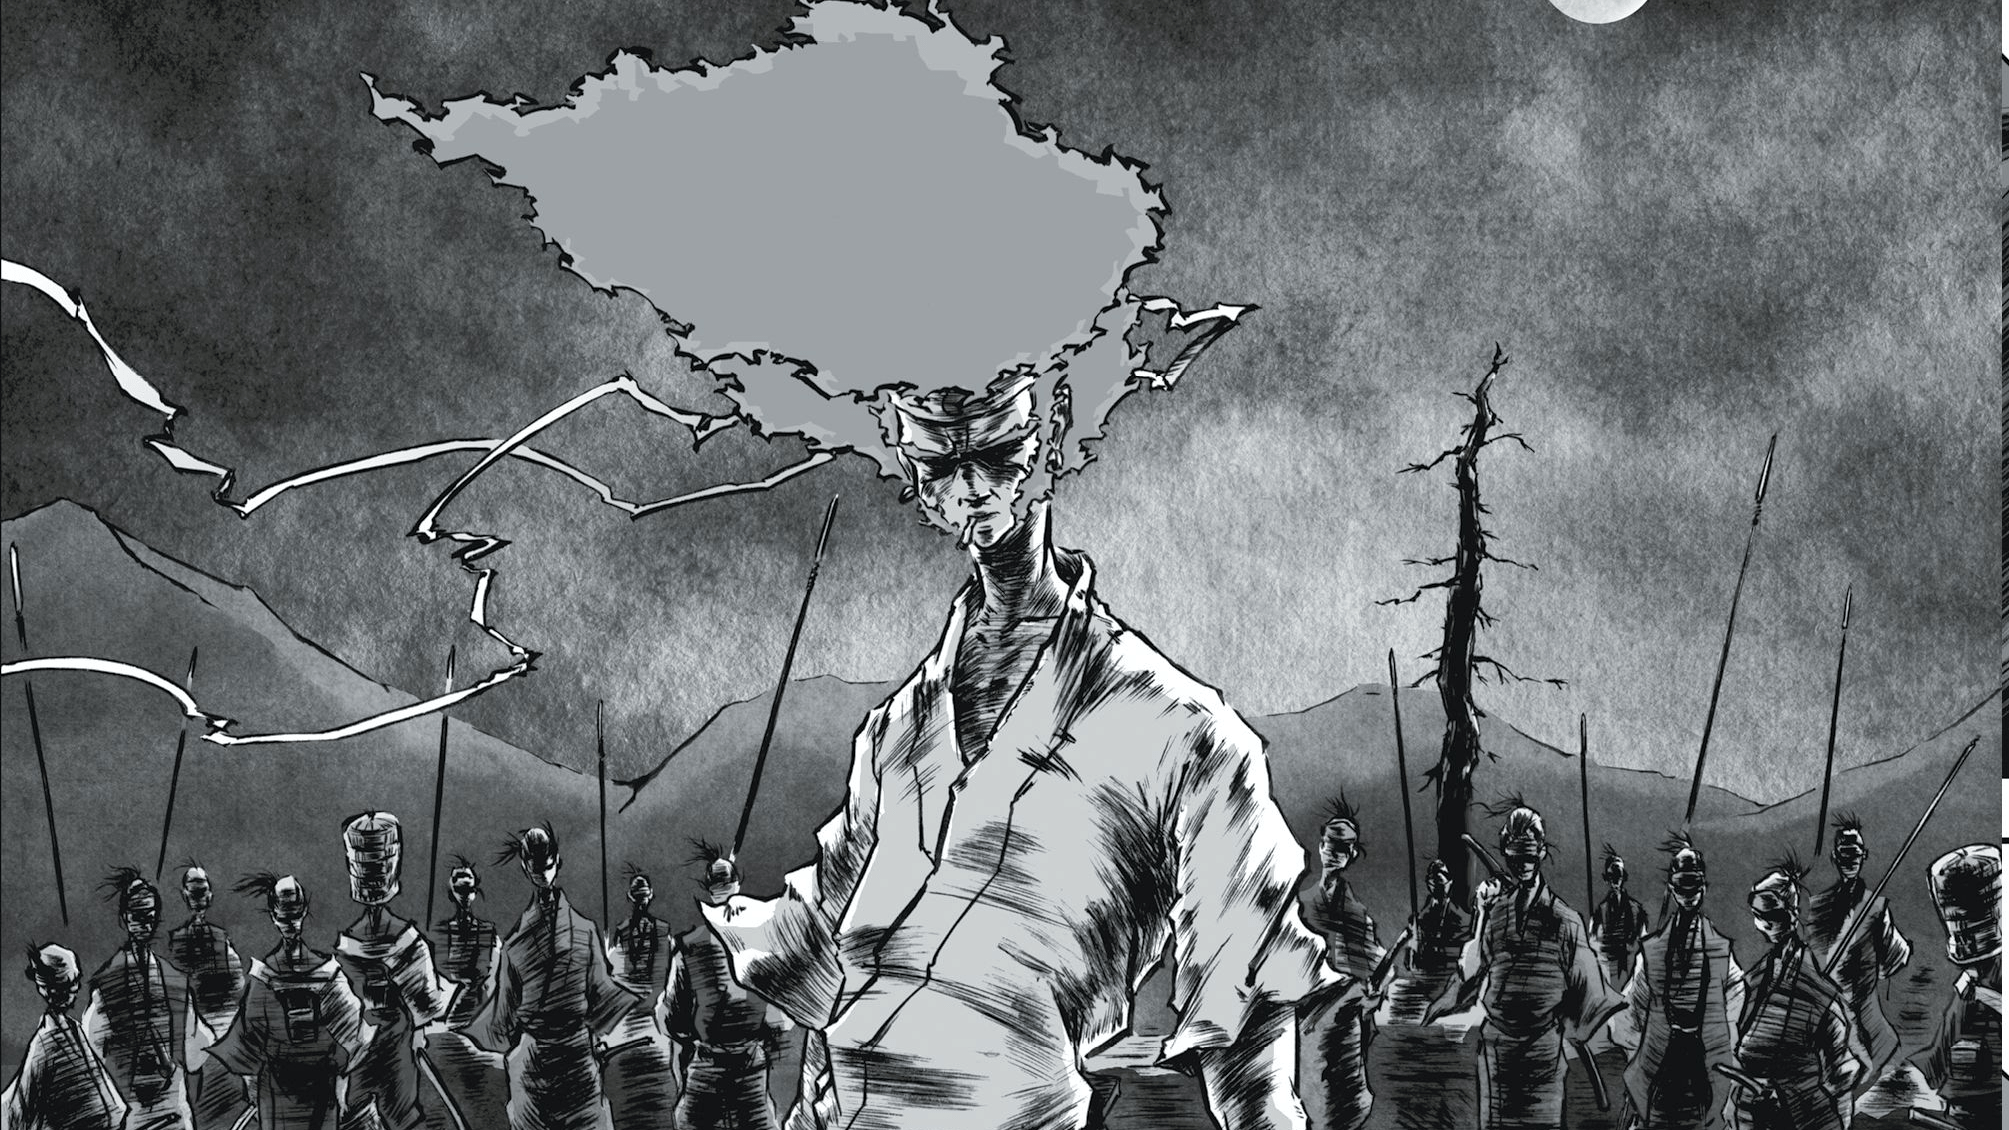 The Afro Samurai Manga Is Back in Print, and Better Than Ever